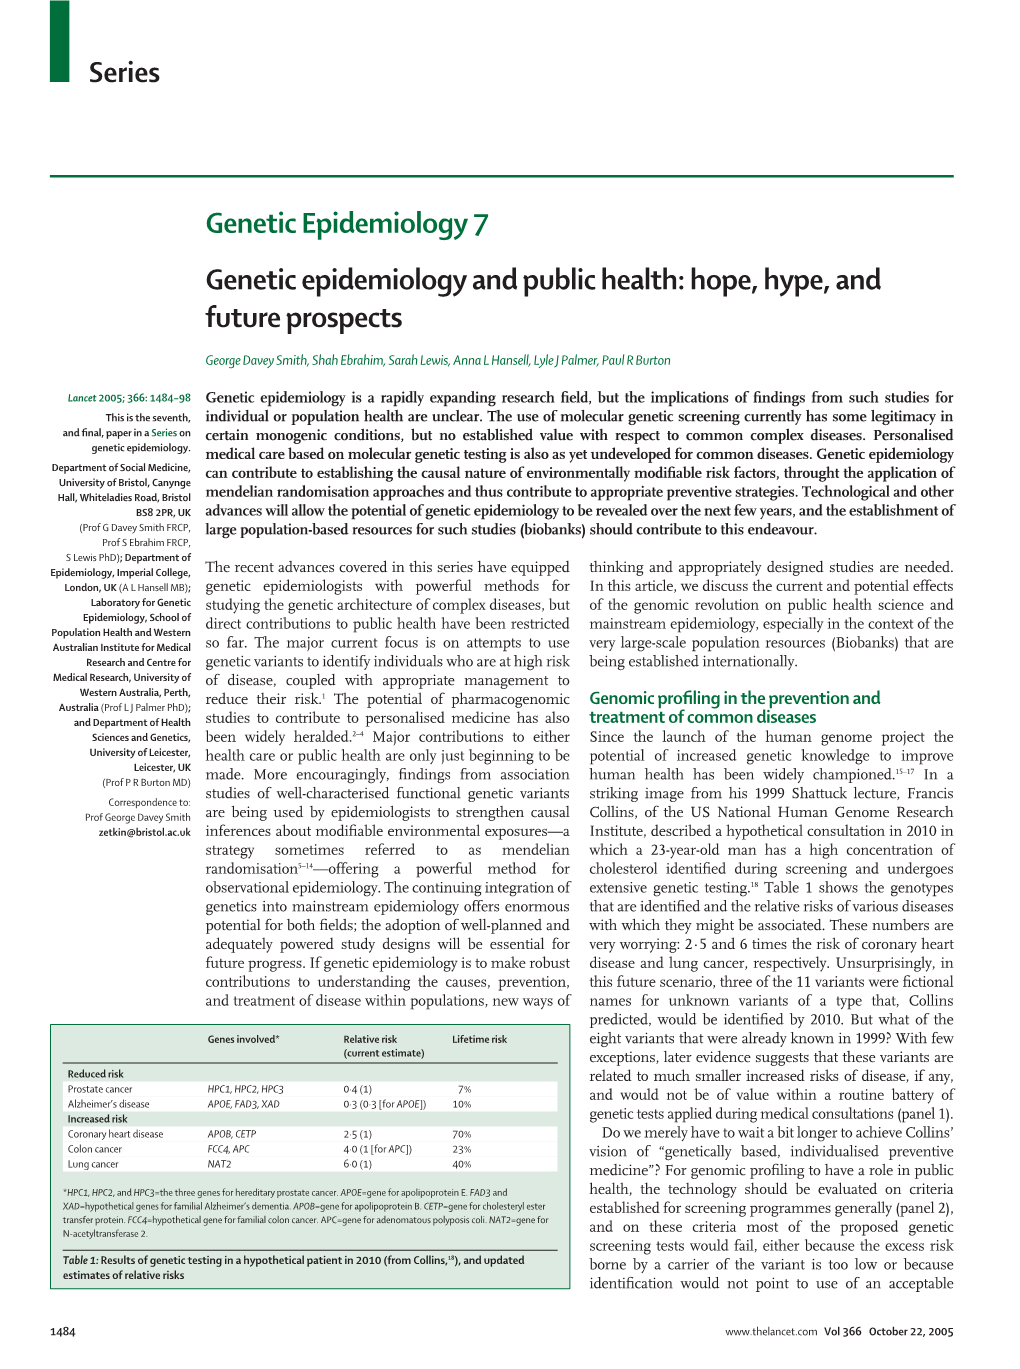 Genetic Epidemiology and Public Health: Hope, Hype, and Future Prospects